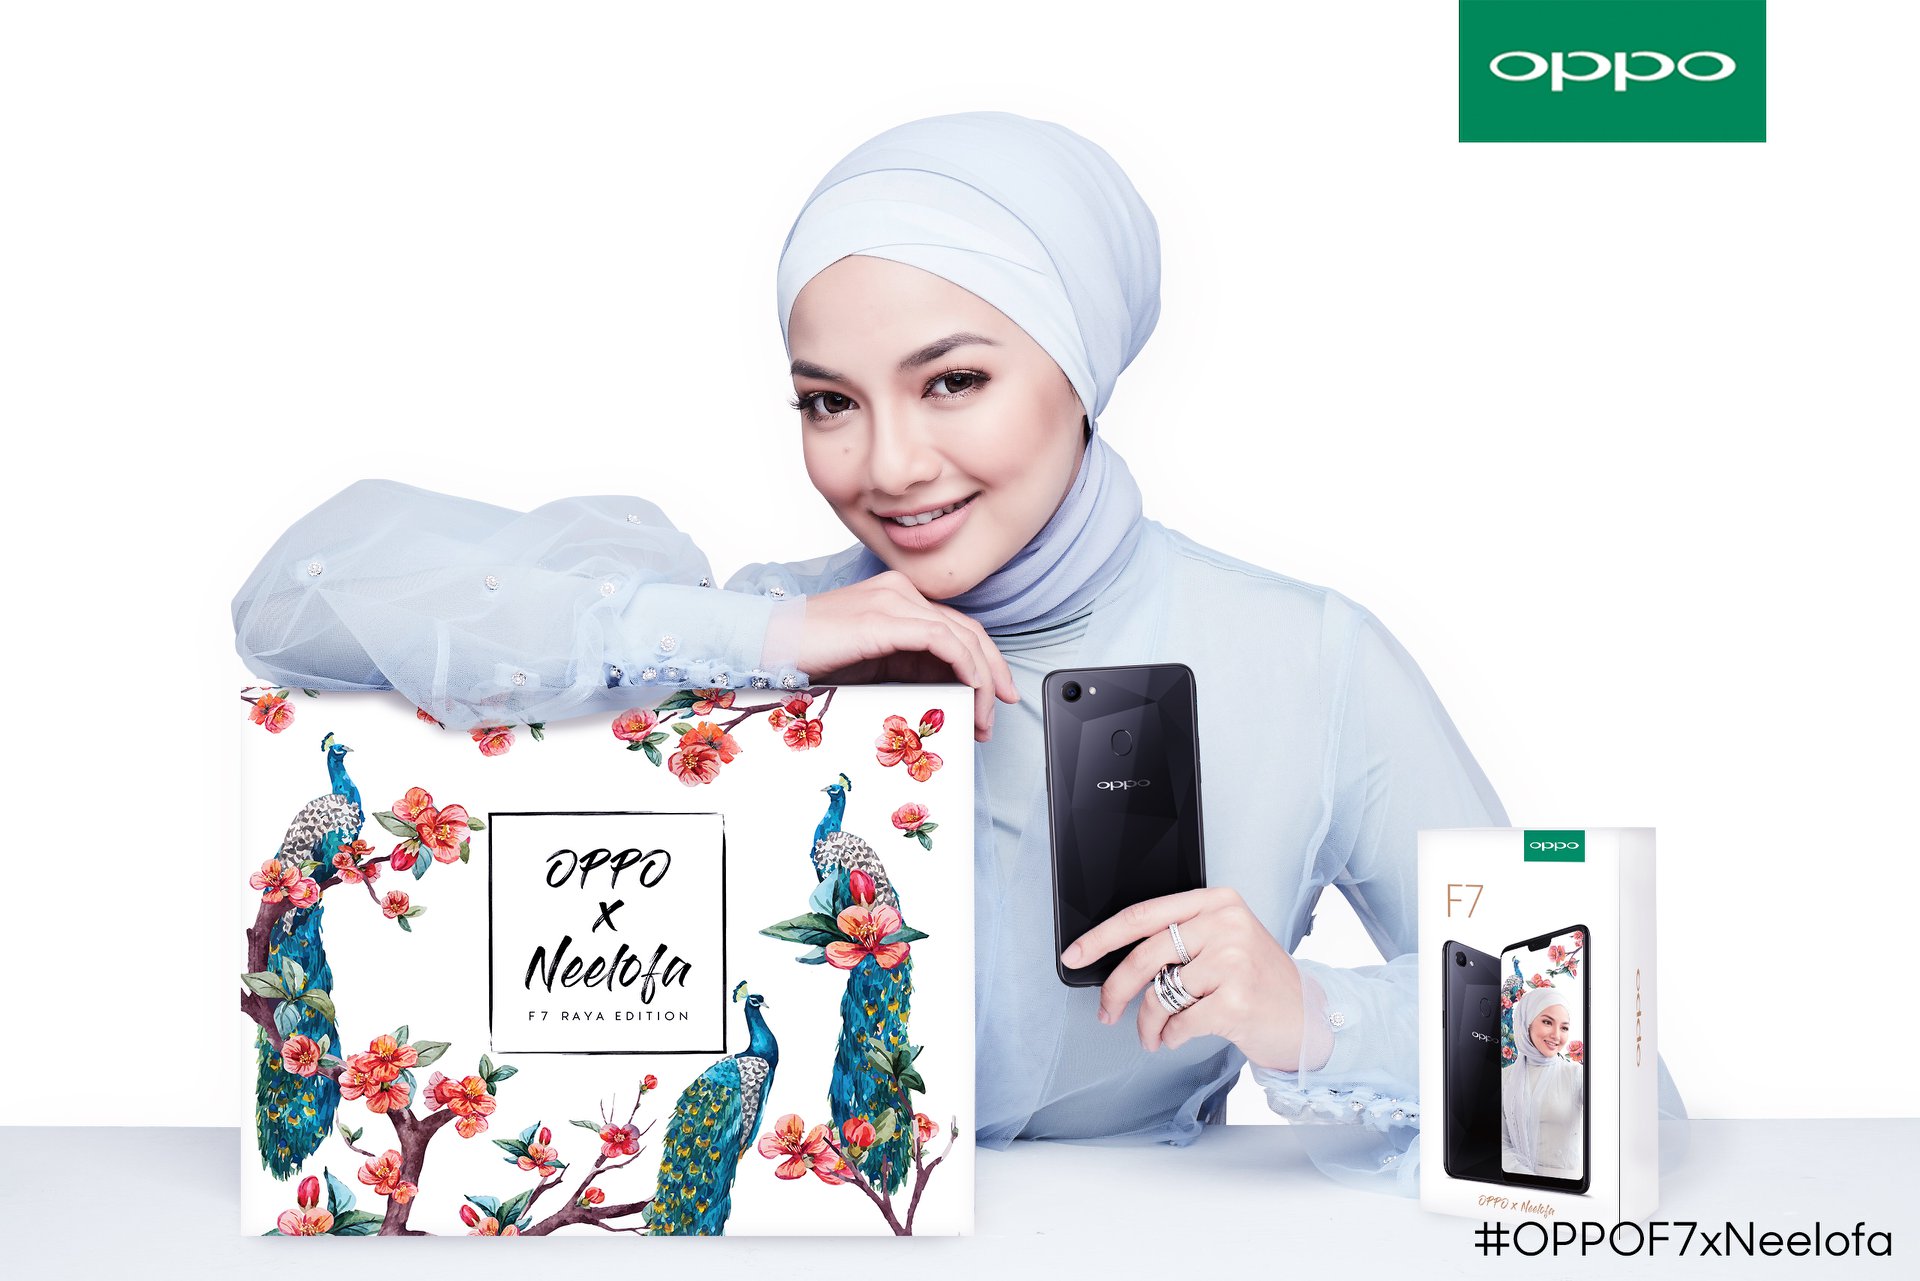 OPPO F7 x Neelofa edition pre-order coming soon on 1 June 2018 for RM1399